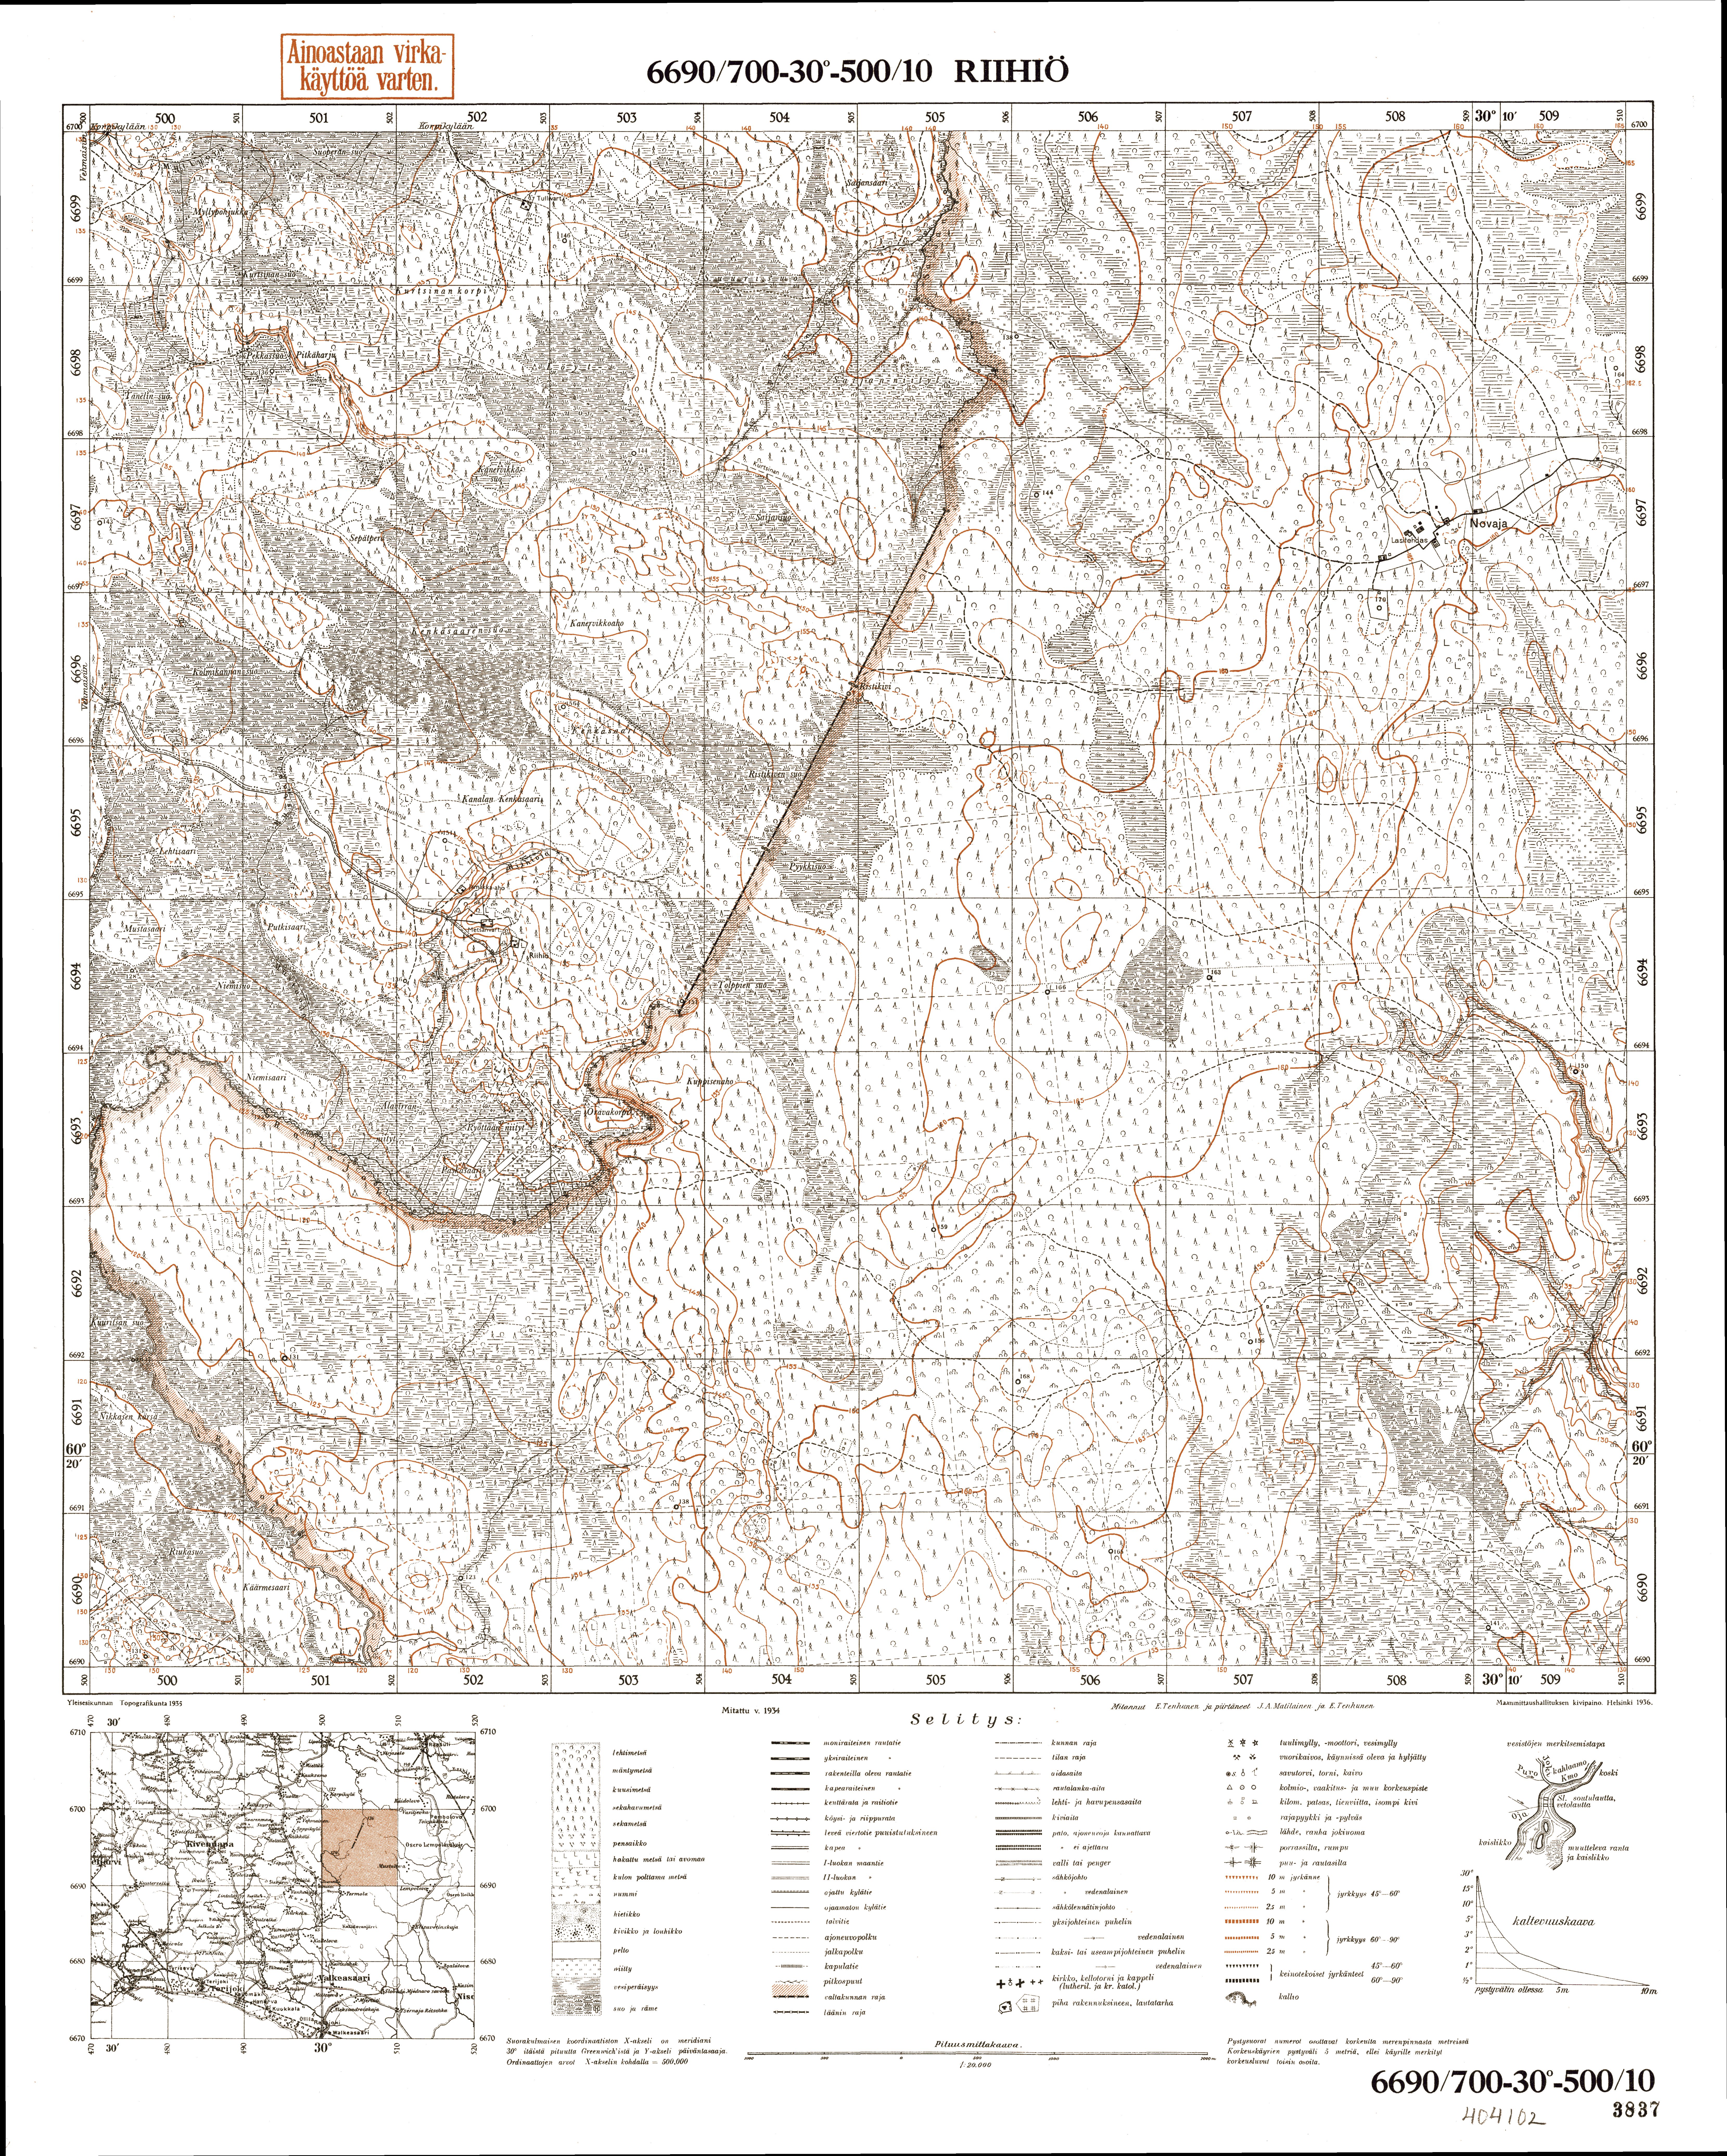 Lesnoje Village Site. Riihiö. Topografikartta 404102. Topographic map from 1942. Use the zooming tool to explore in higher level of detail. Obtain as a quality print or high resolution image